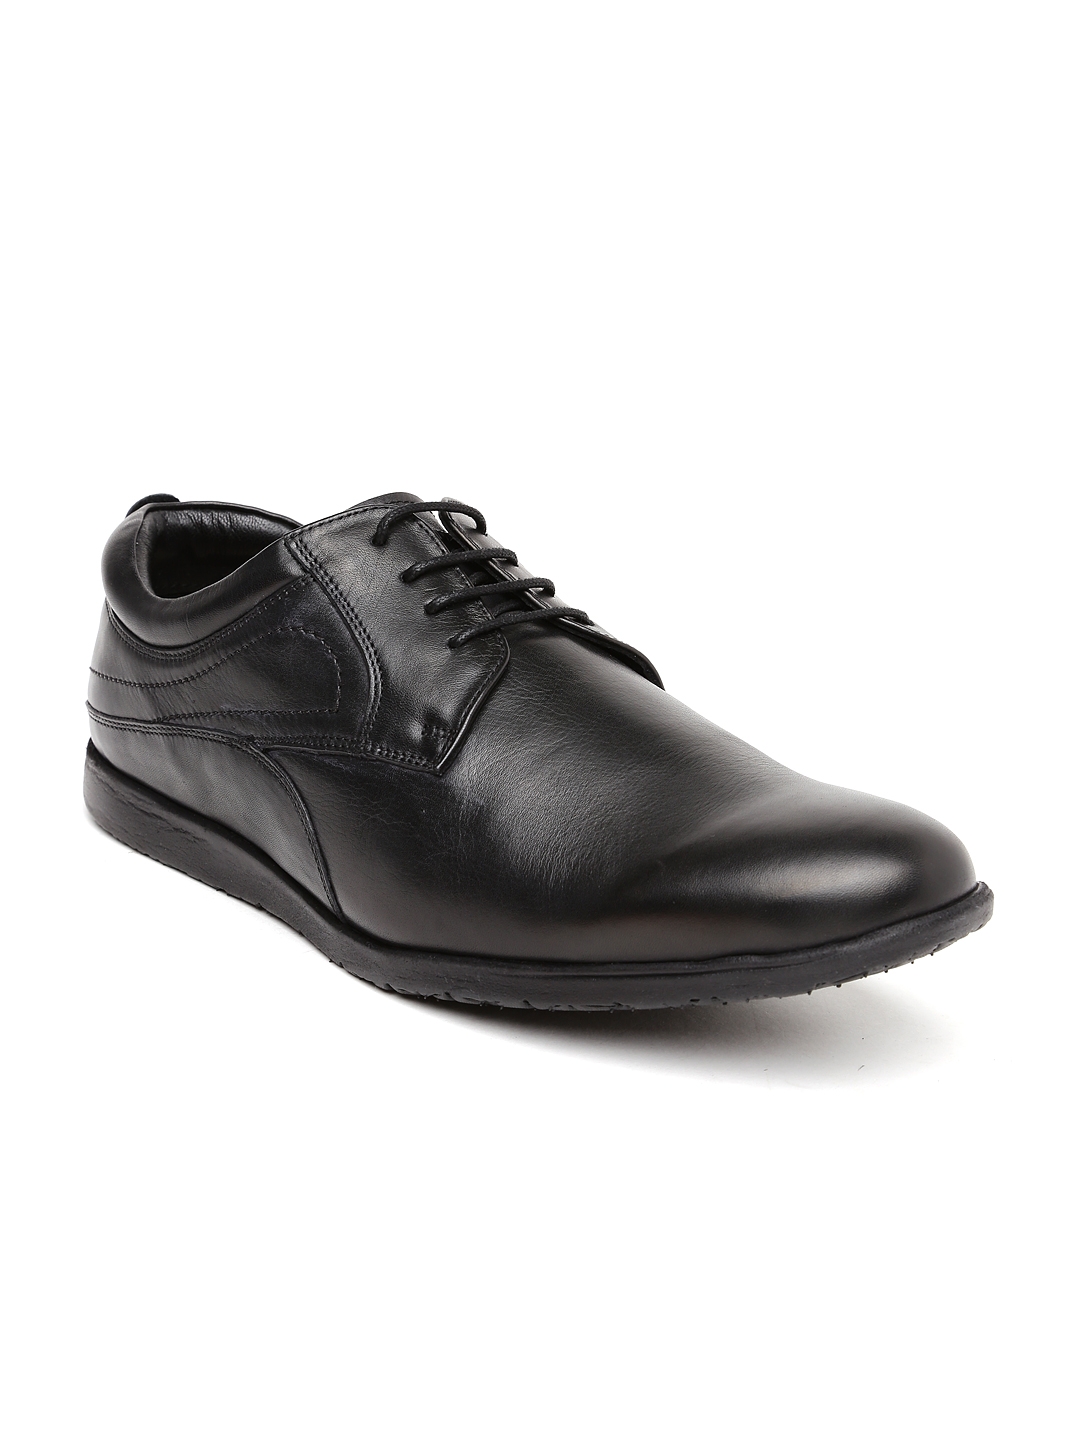 hush puppies formal shoes